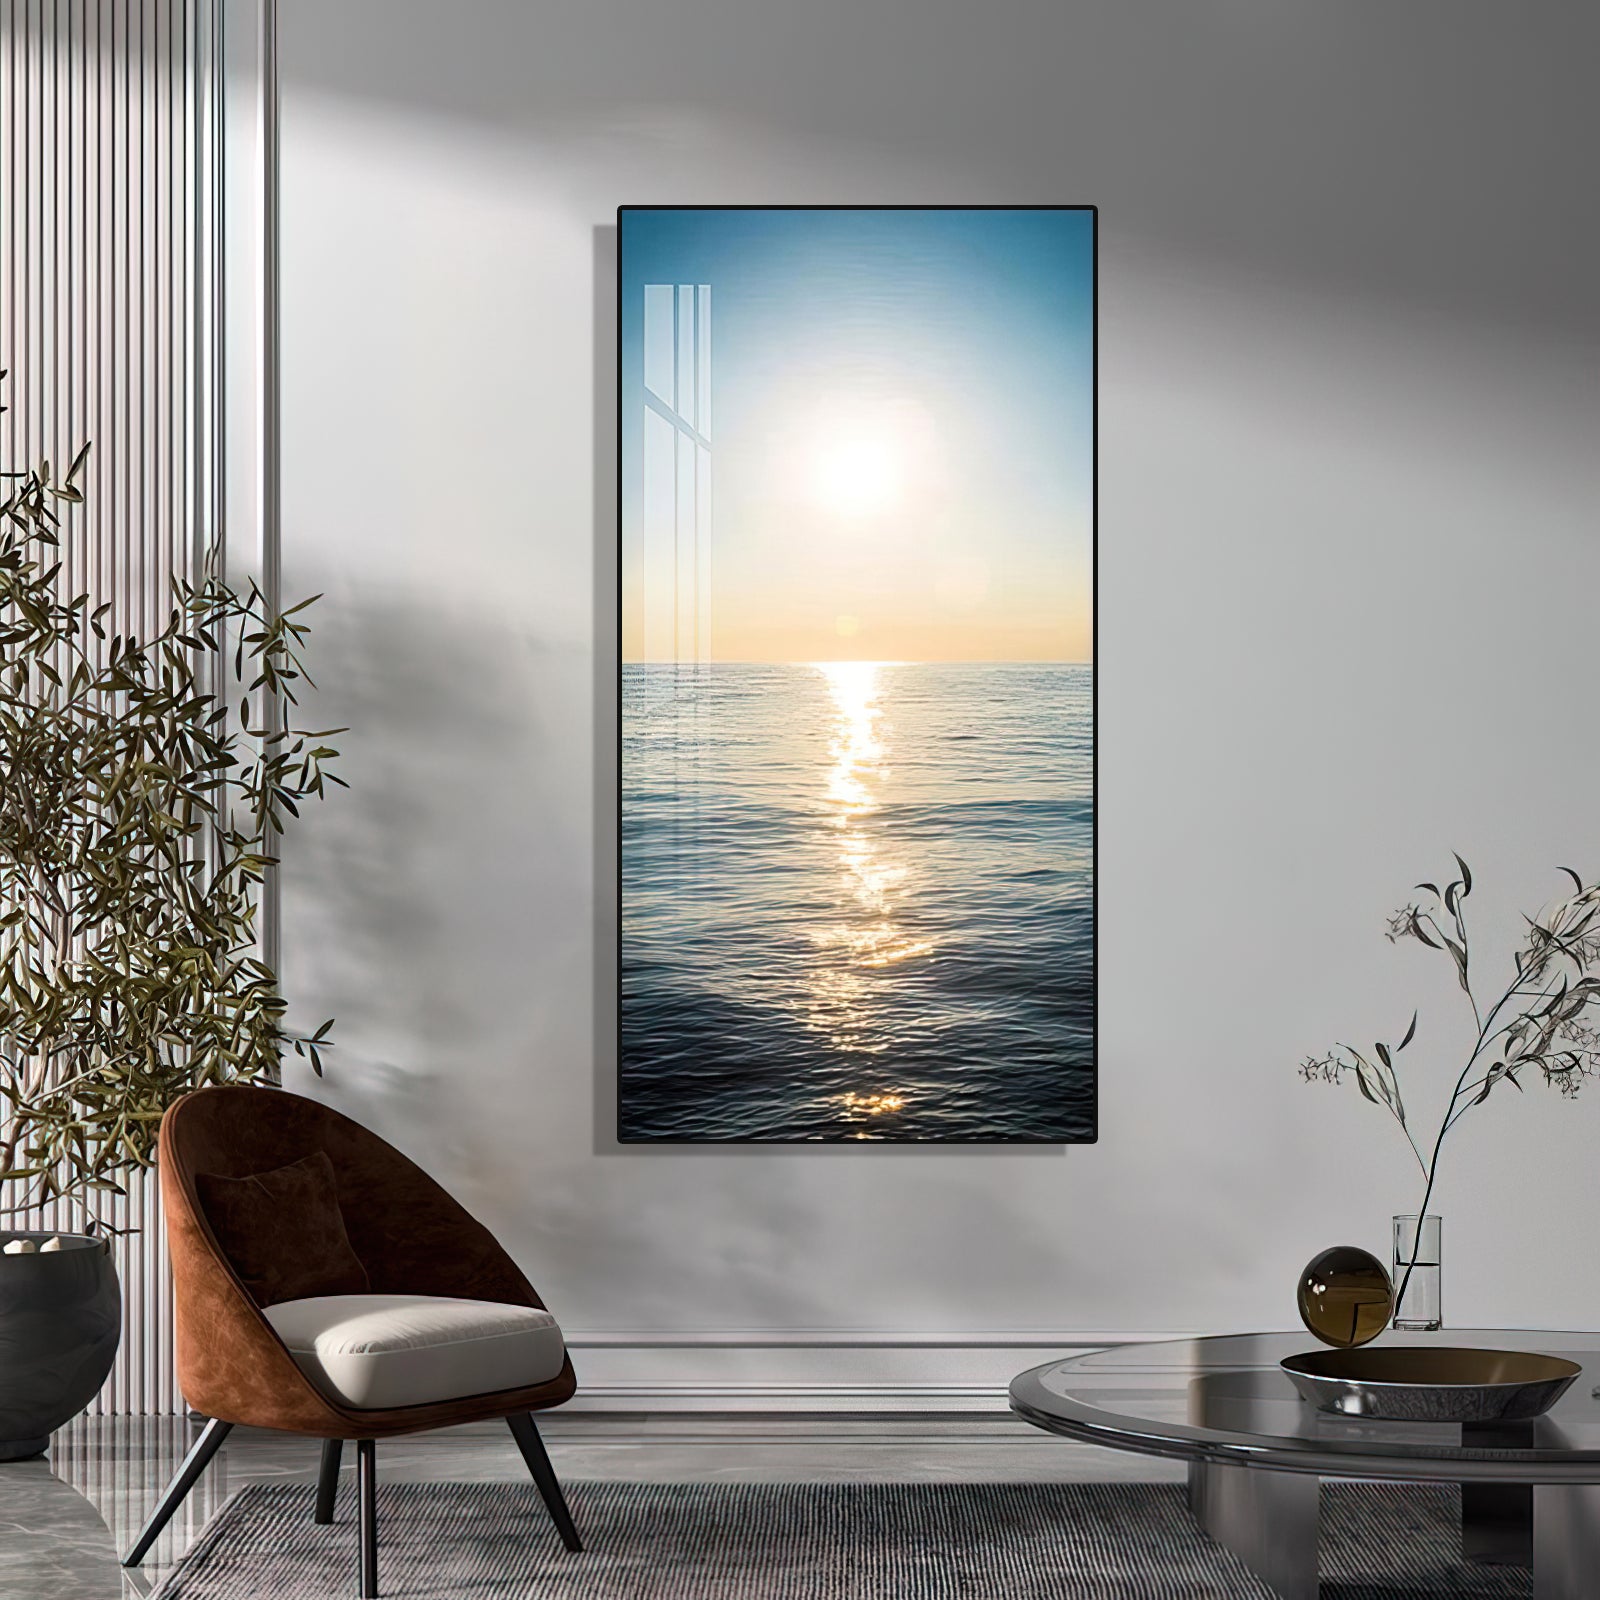 Serene Ocean Landscape Wall Painting - 50x100 cm Home Decor crystal porcelain Framed Large wall wall art wall accents landscape Nature-inspired